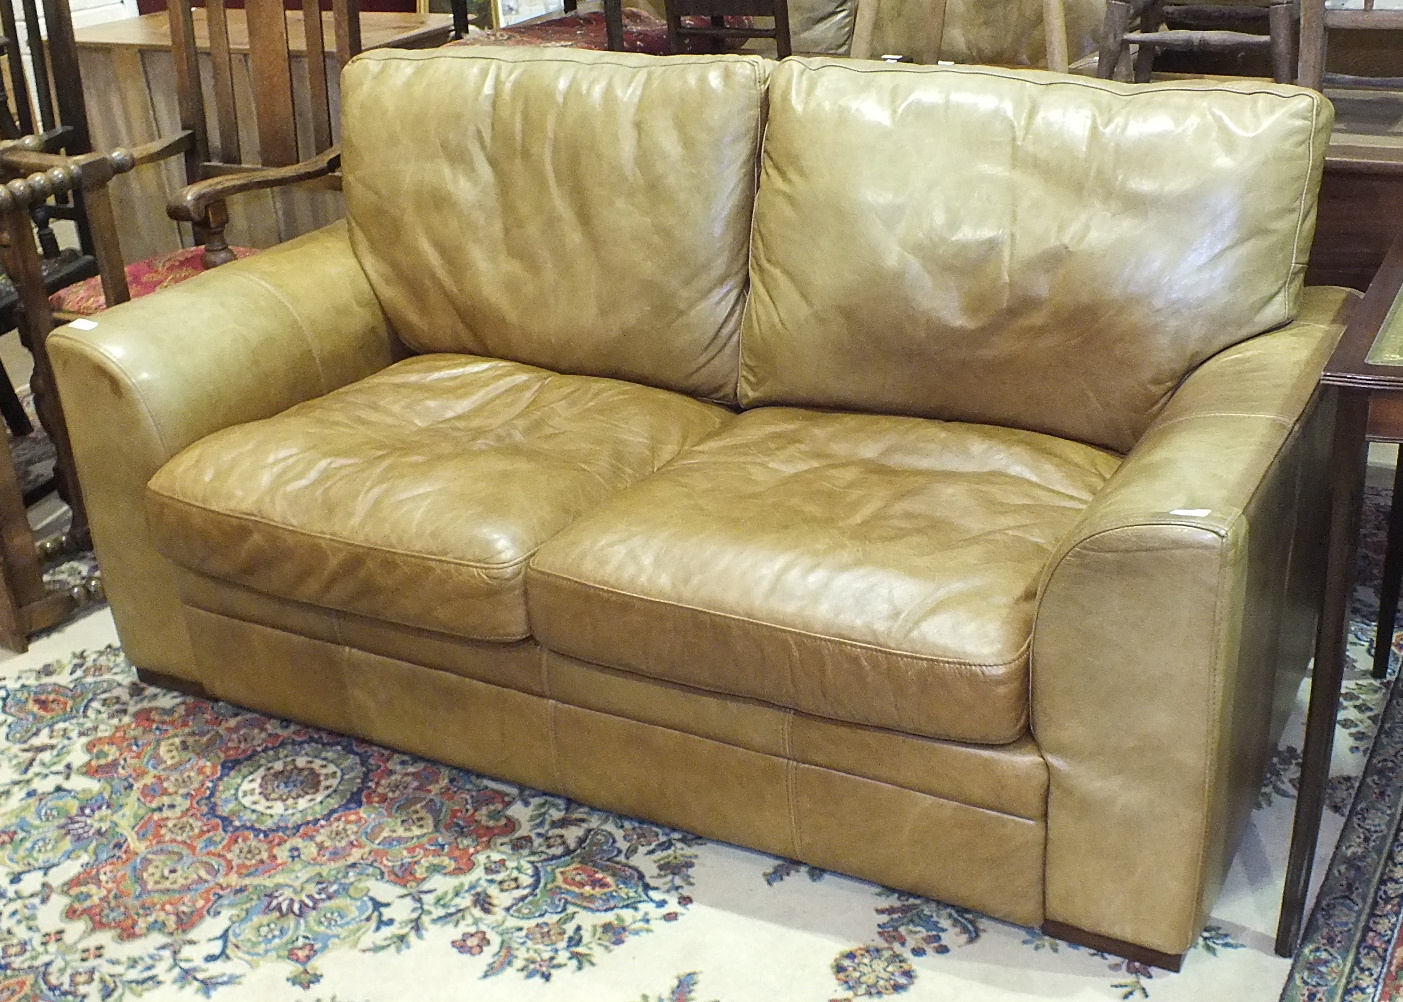 A similar two-seater settee, 172cm wide.